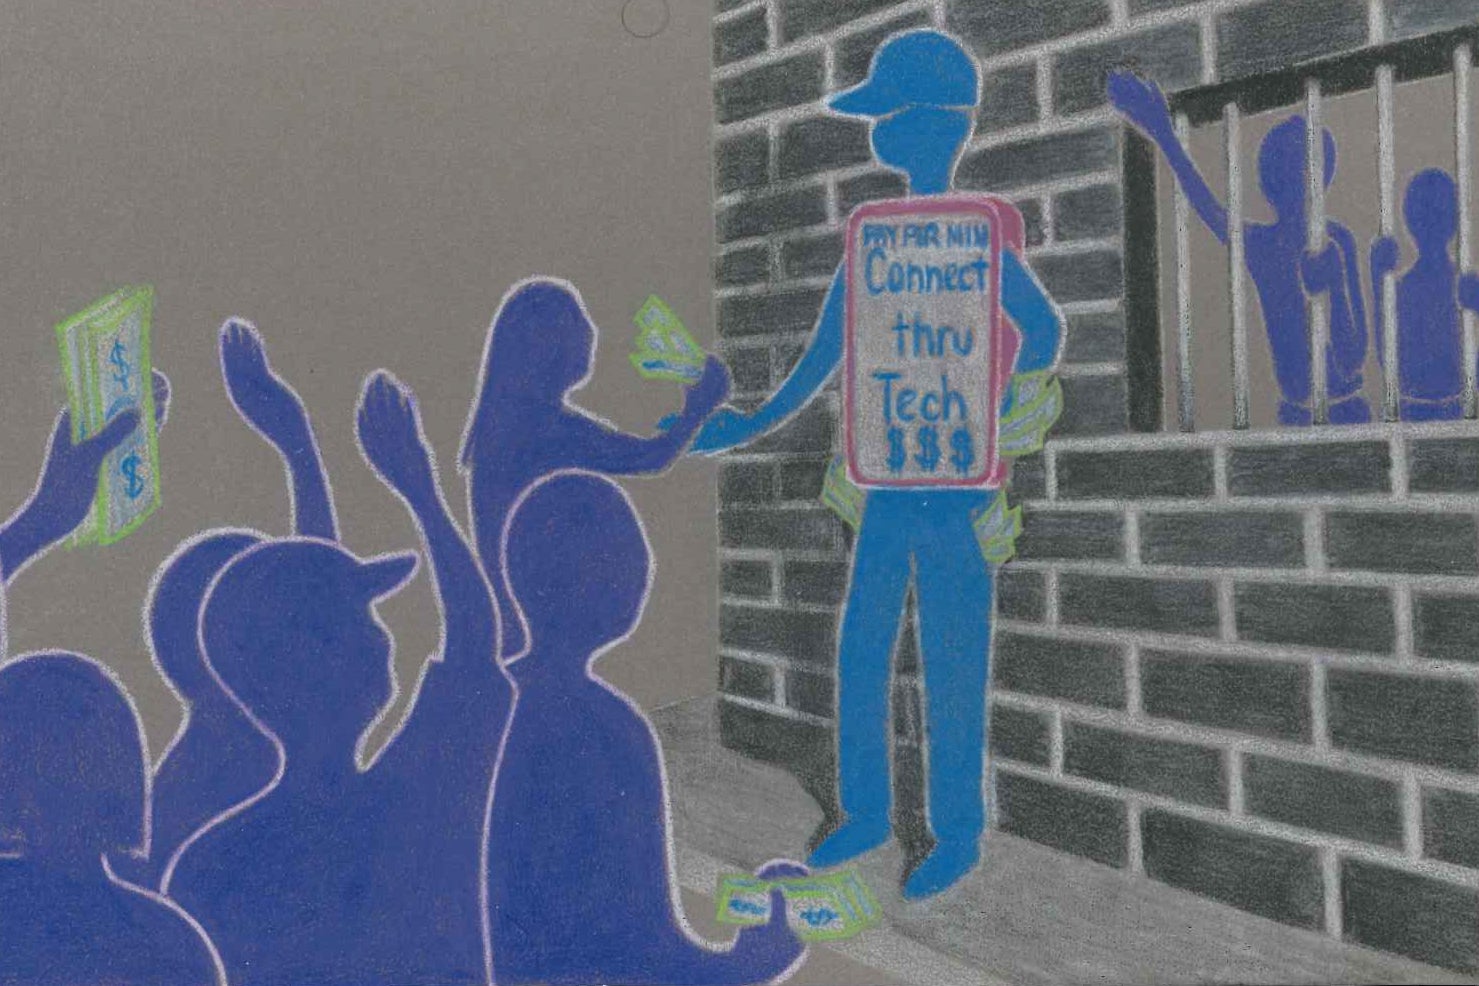 On the left, a crowd of figures holds out dollar bills, which they are handing to a man with a shirt that says "connect thru tech." On the other side of the man is an illustration of a prison, with two figures reaching out from a barred window.   